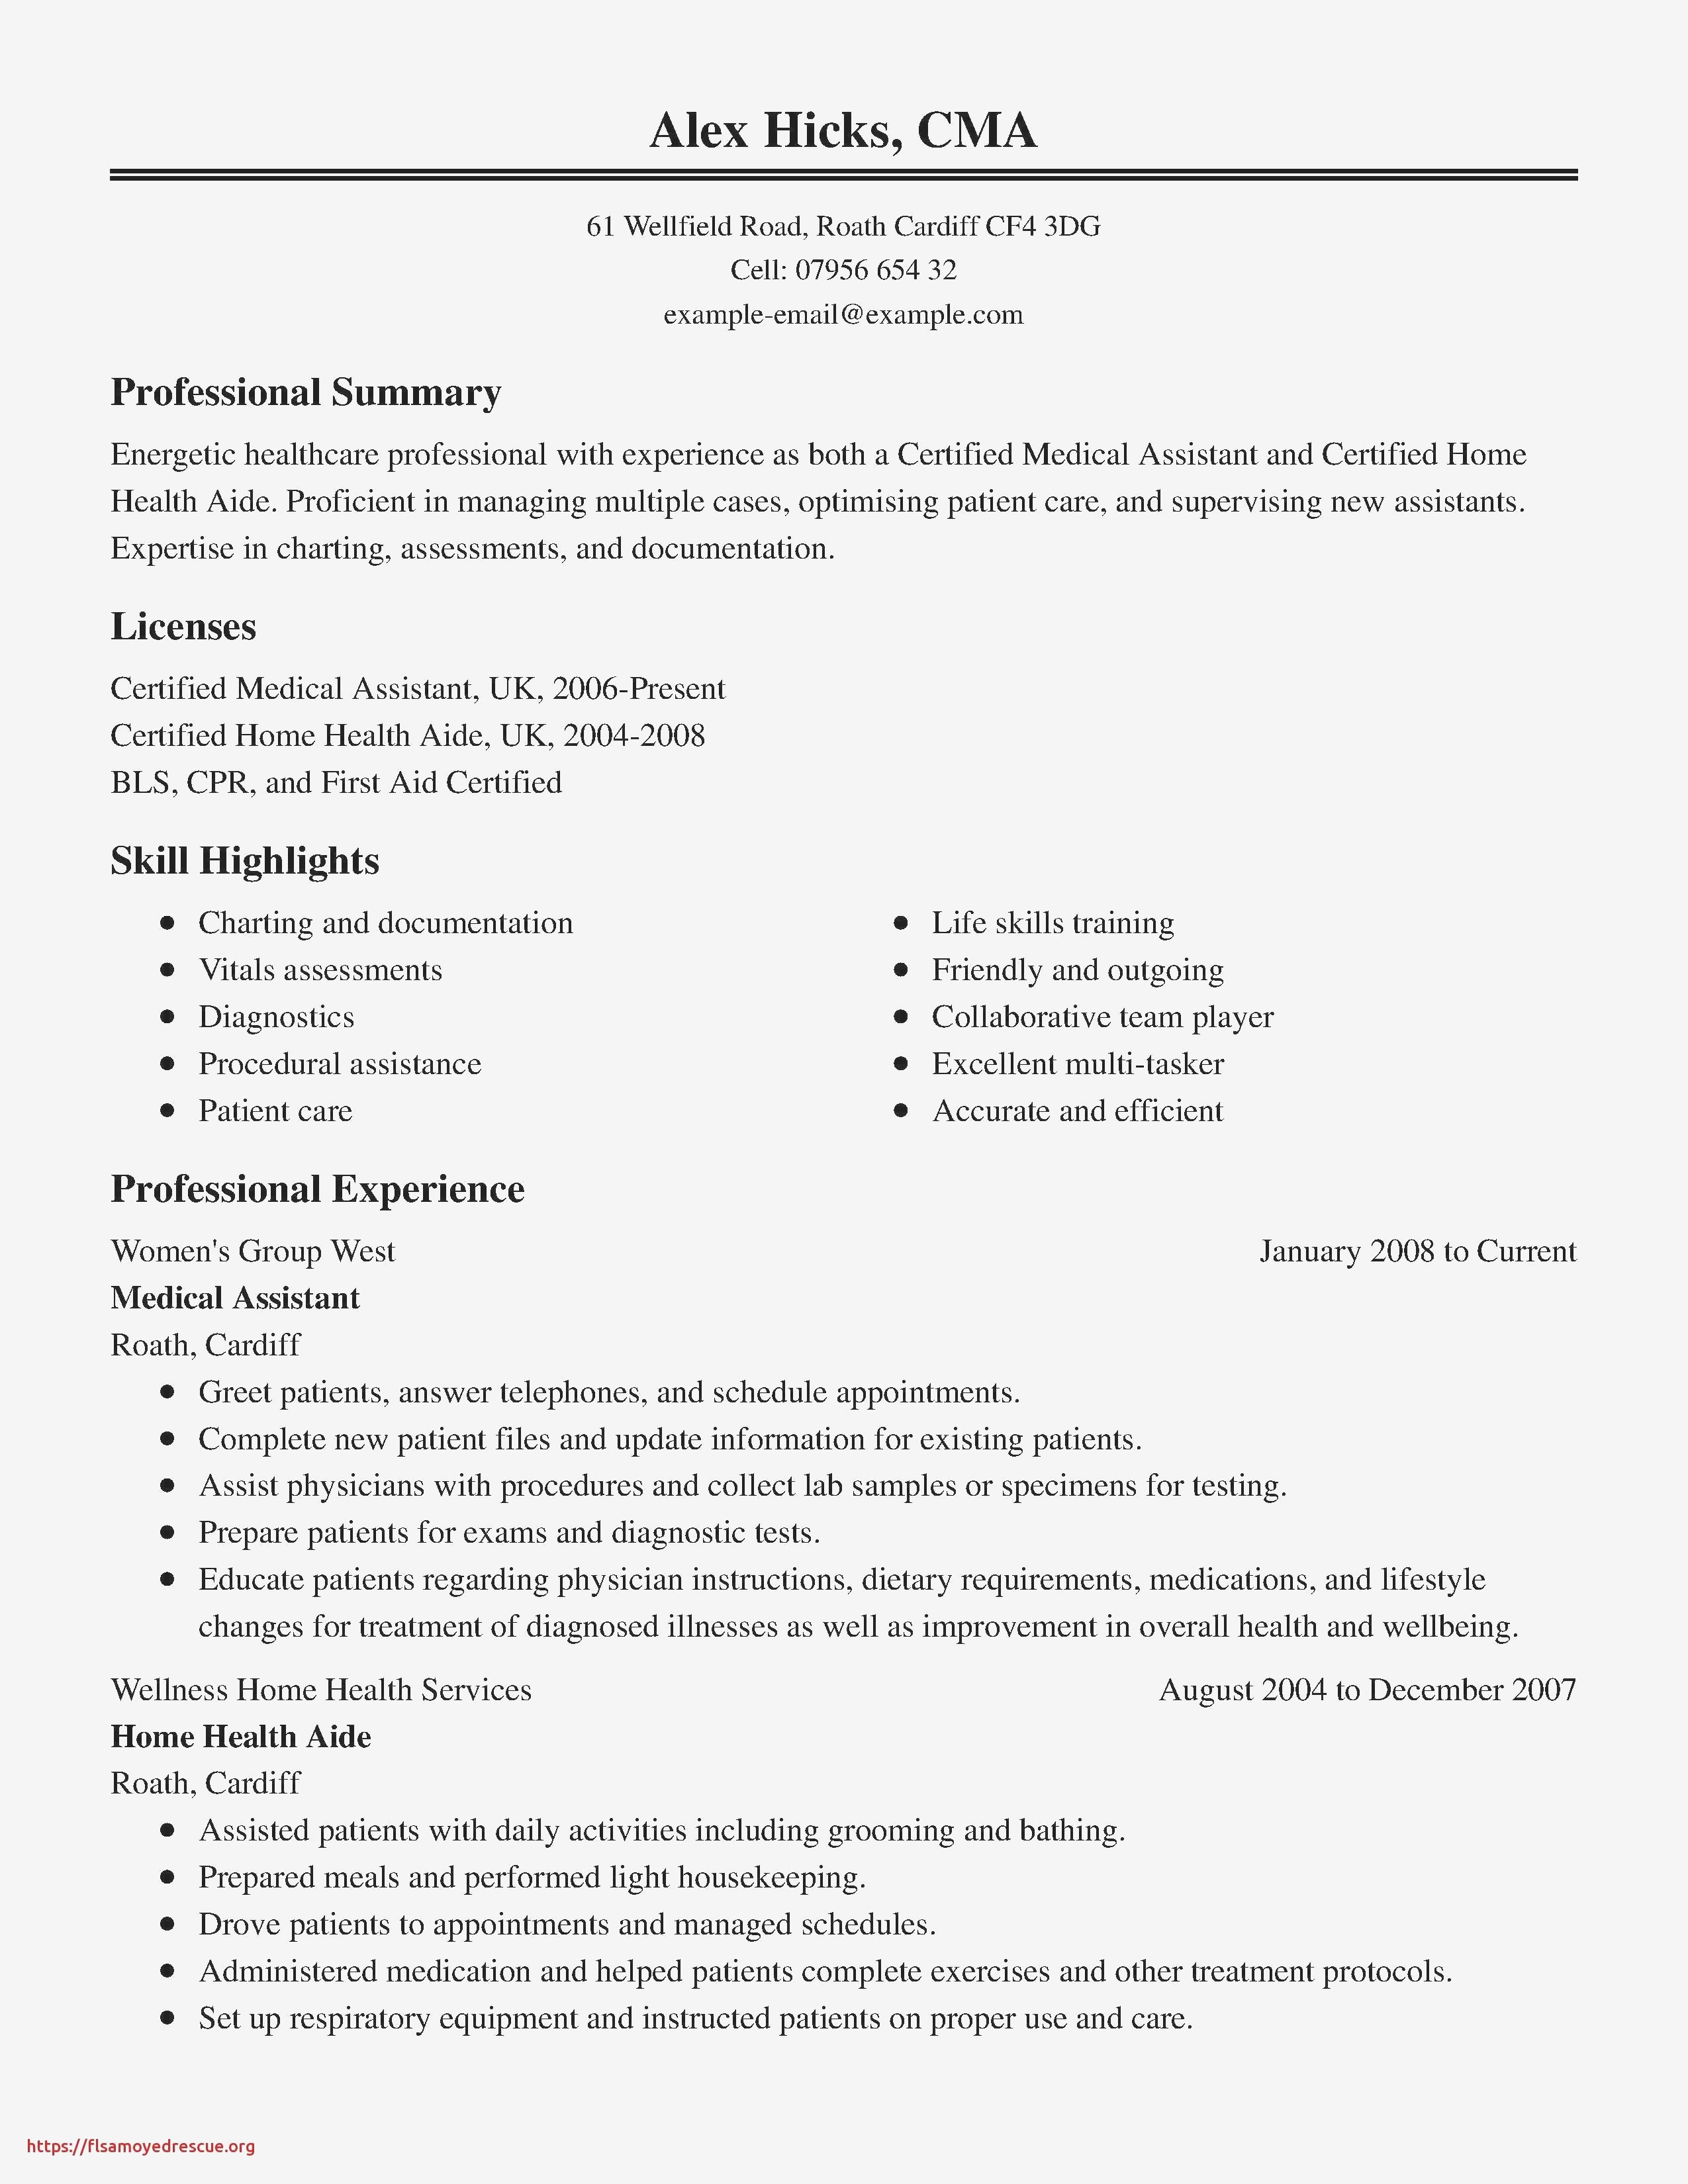 Professional Resume Examples Professional Resume Examples Intriguing Medical Resume Samples With Healthcare Resume Examples Awesome Pictures professional resume examples|wikiresume.com